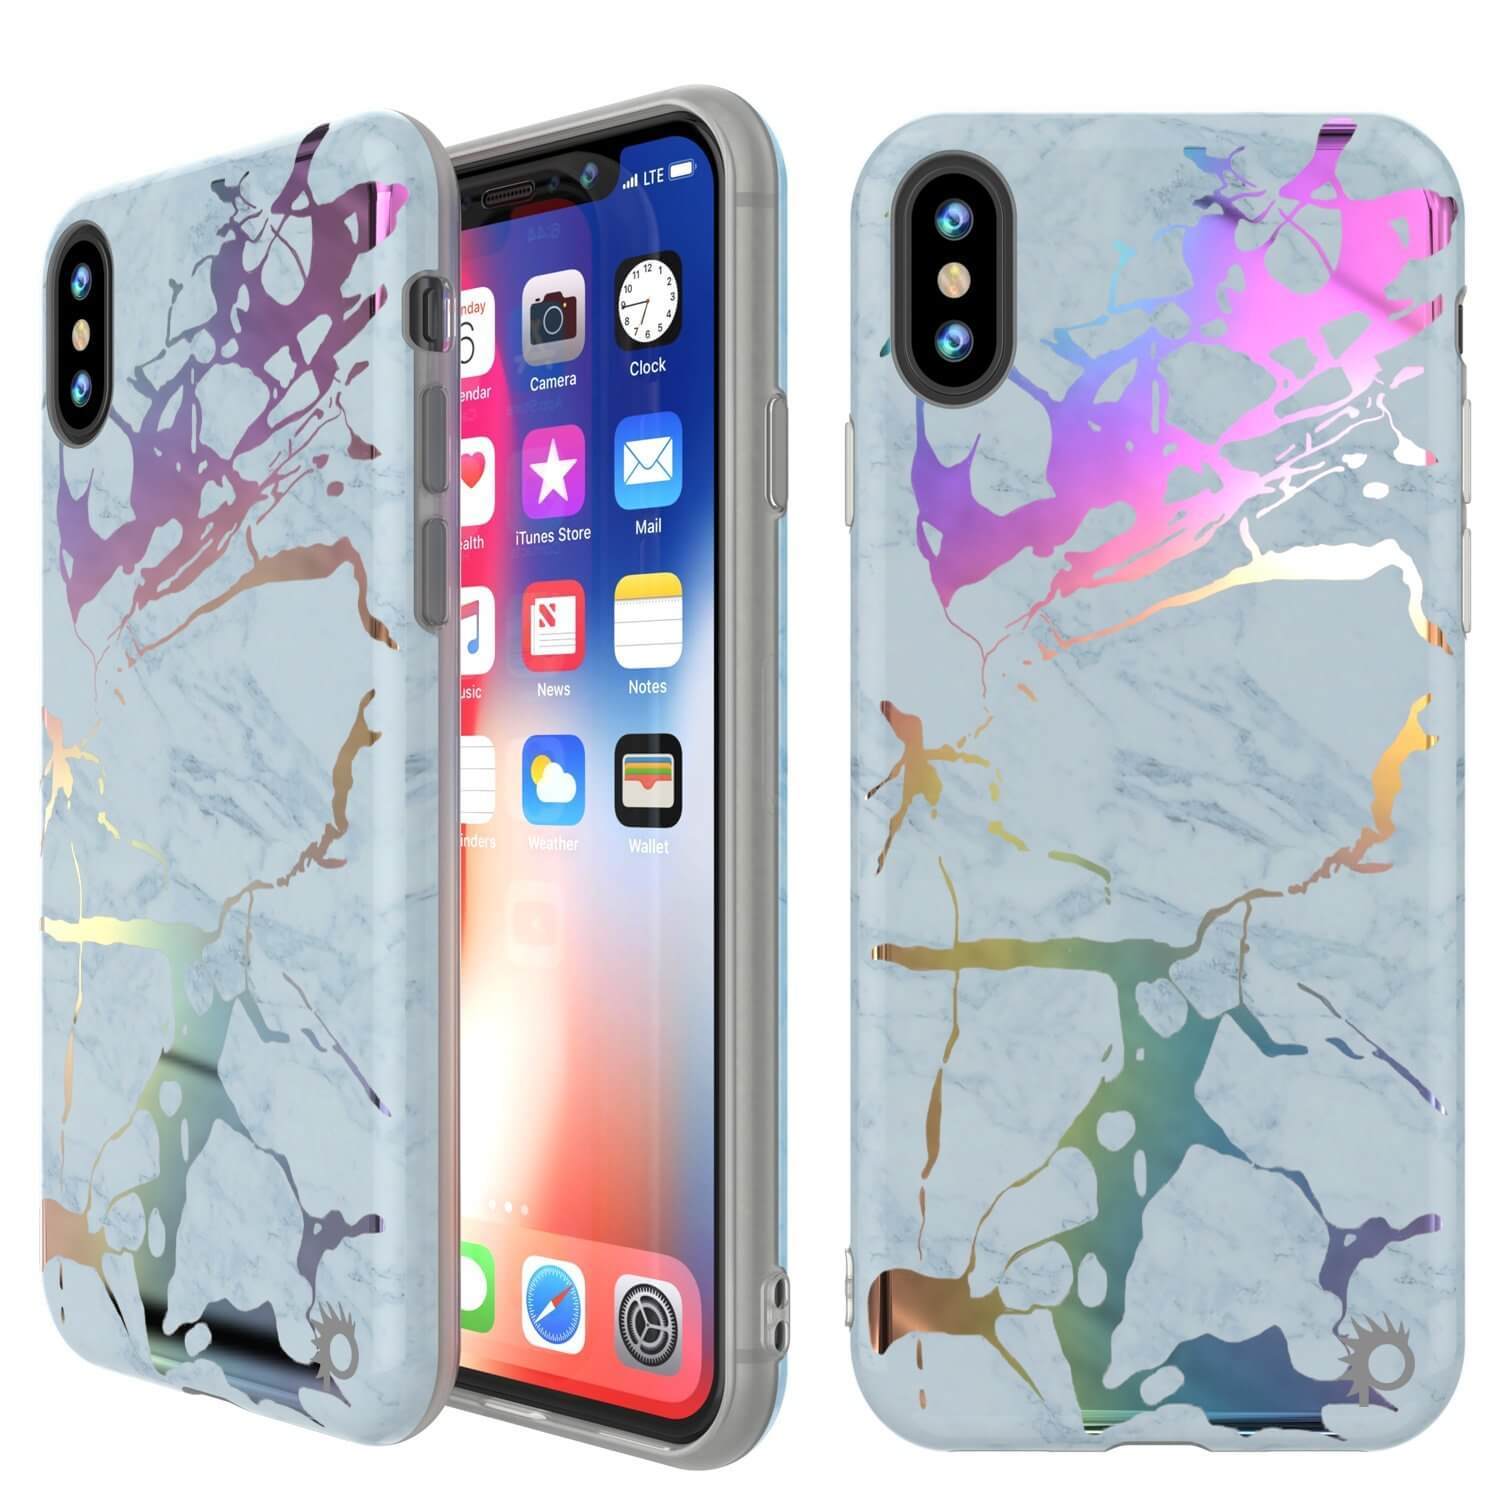 Punkcase iPhone X Marble Case Protective Full Body Cover, Blue Marmo